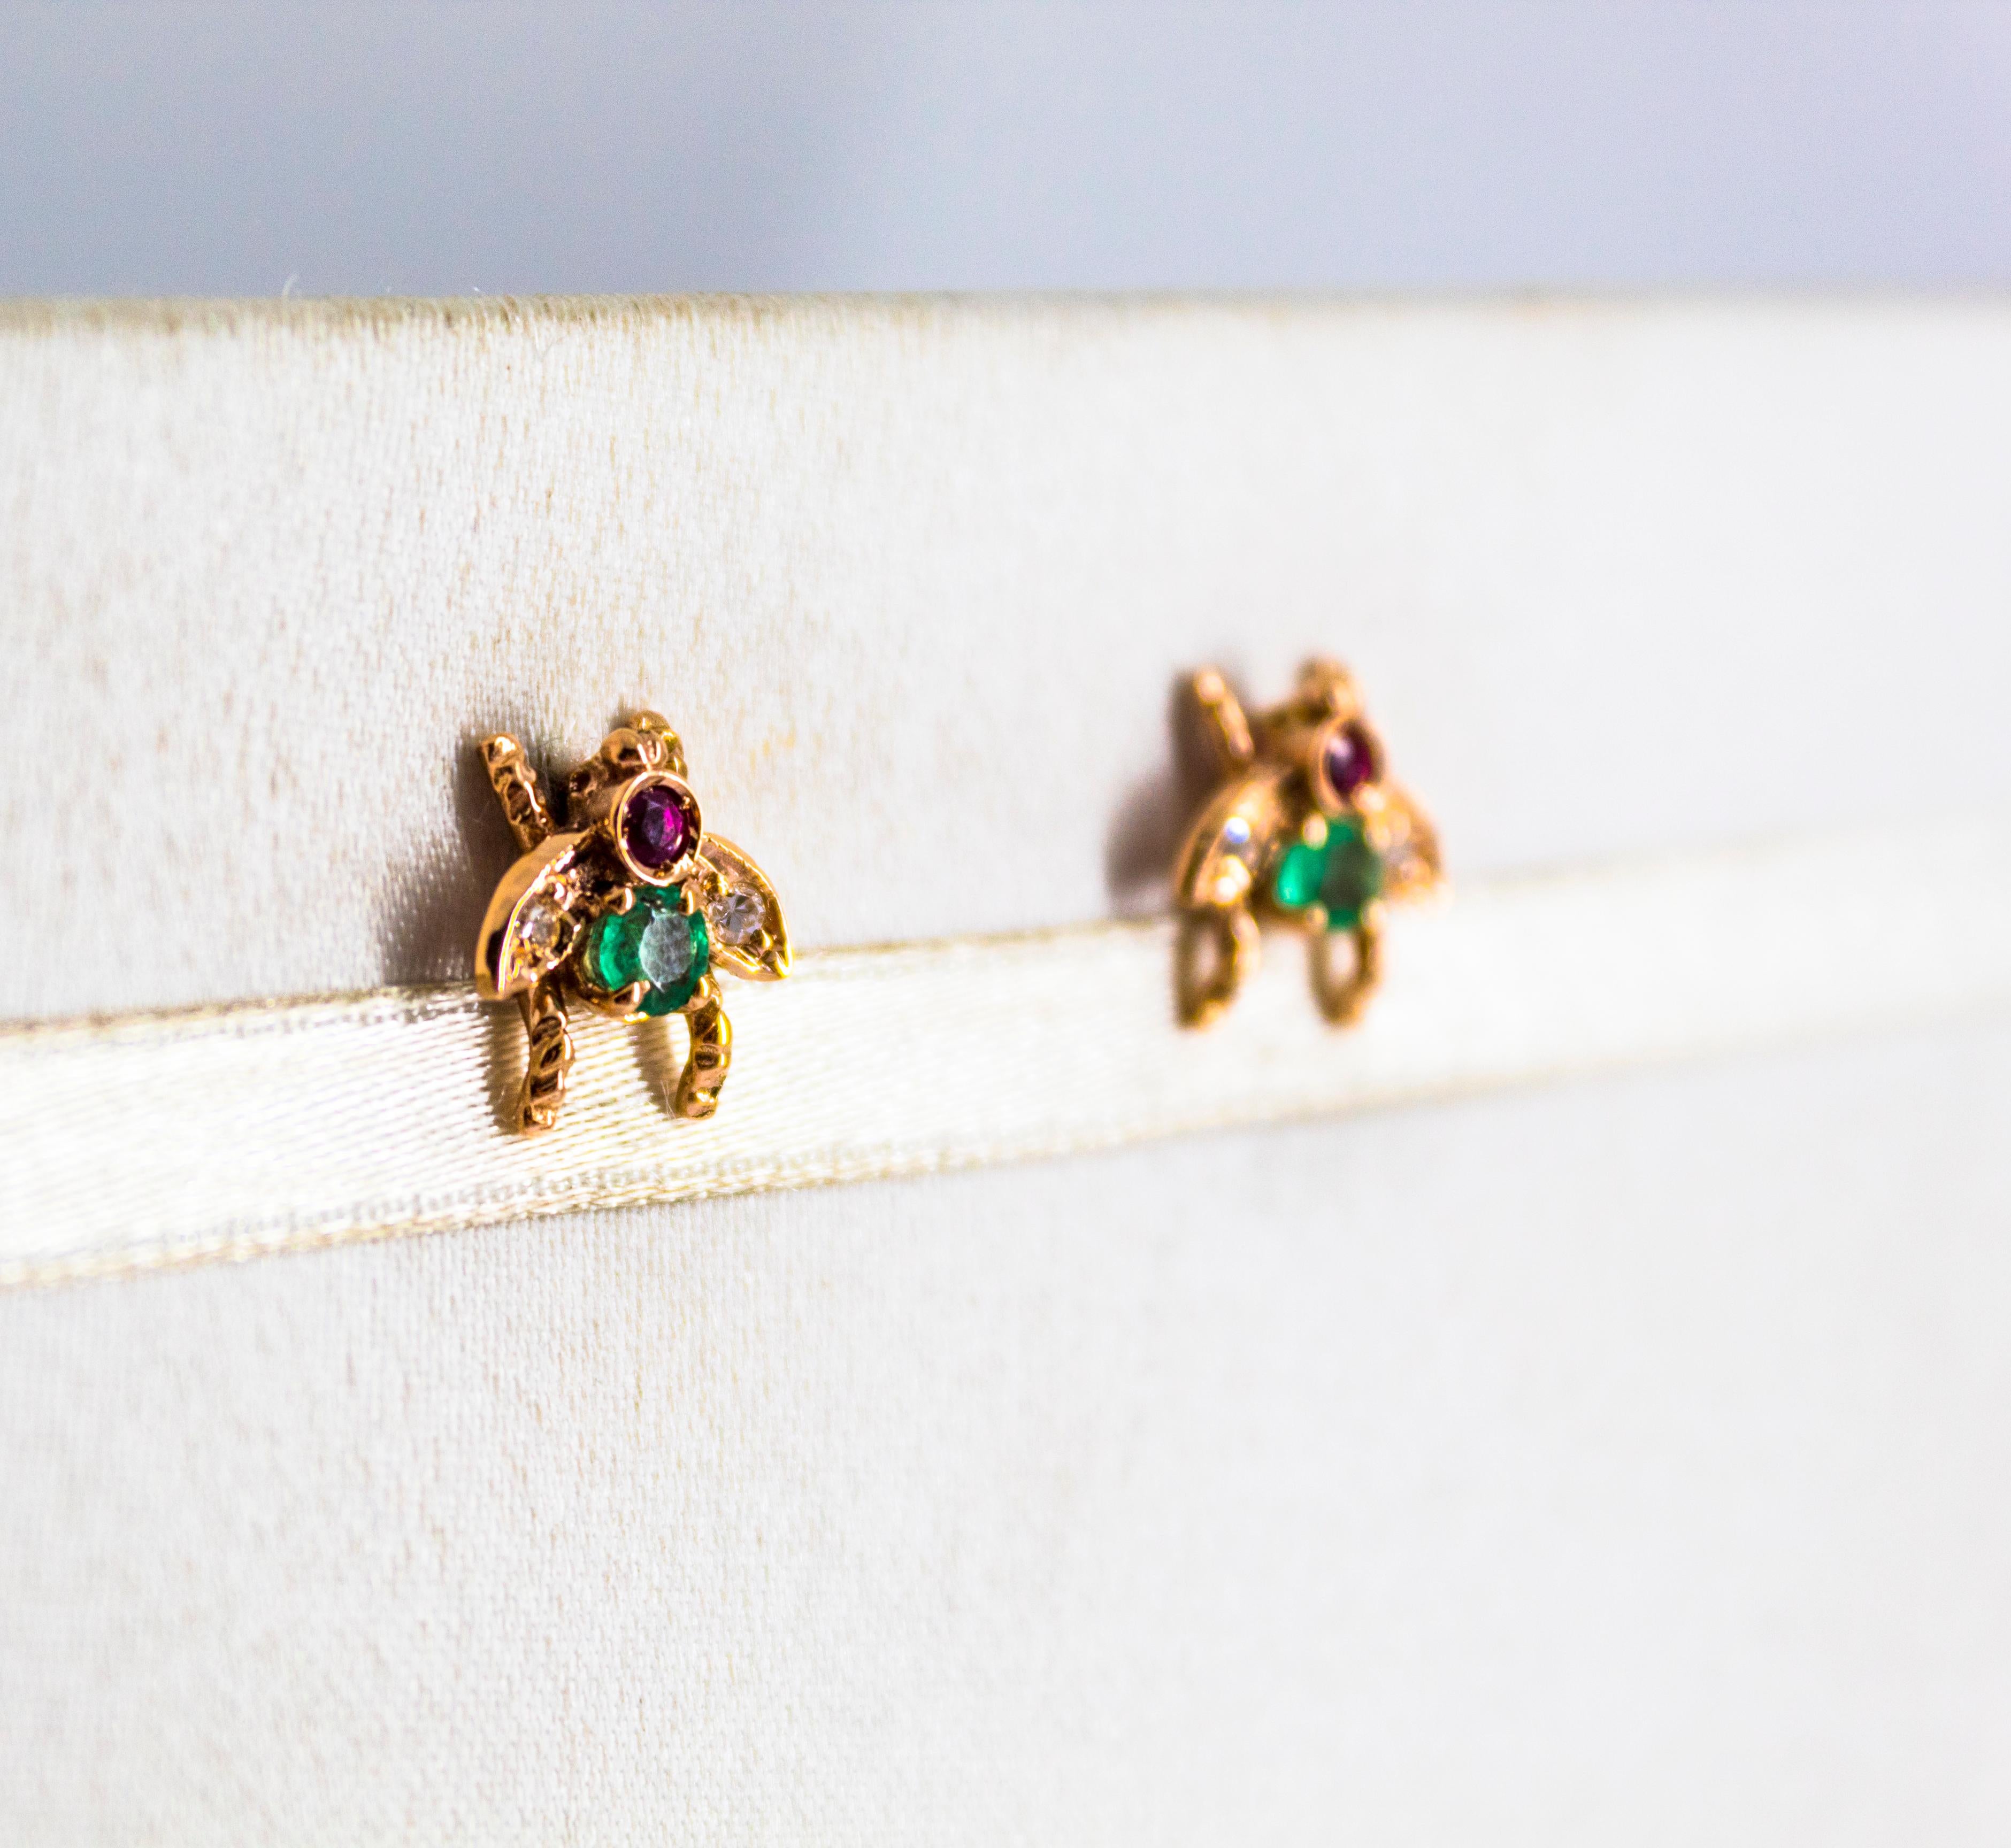 These Stud Earrings are made of 9K Yellow Gold.
These Earrings have 0.08 Carats of White Diamonds.
These Earrings have 0.30 Carats of Emeralds and Rubies.
These Earrings are available also with Blue Sapphires, Aquamarine or any different precious